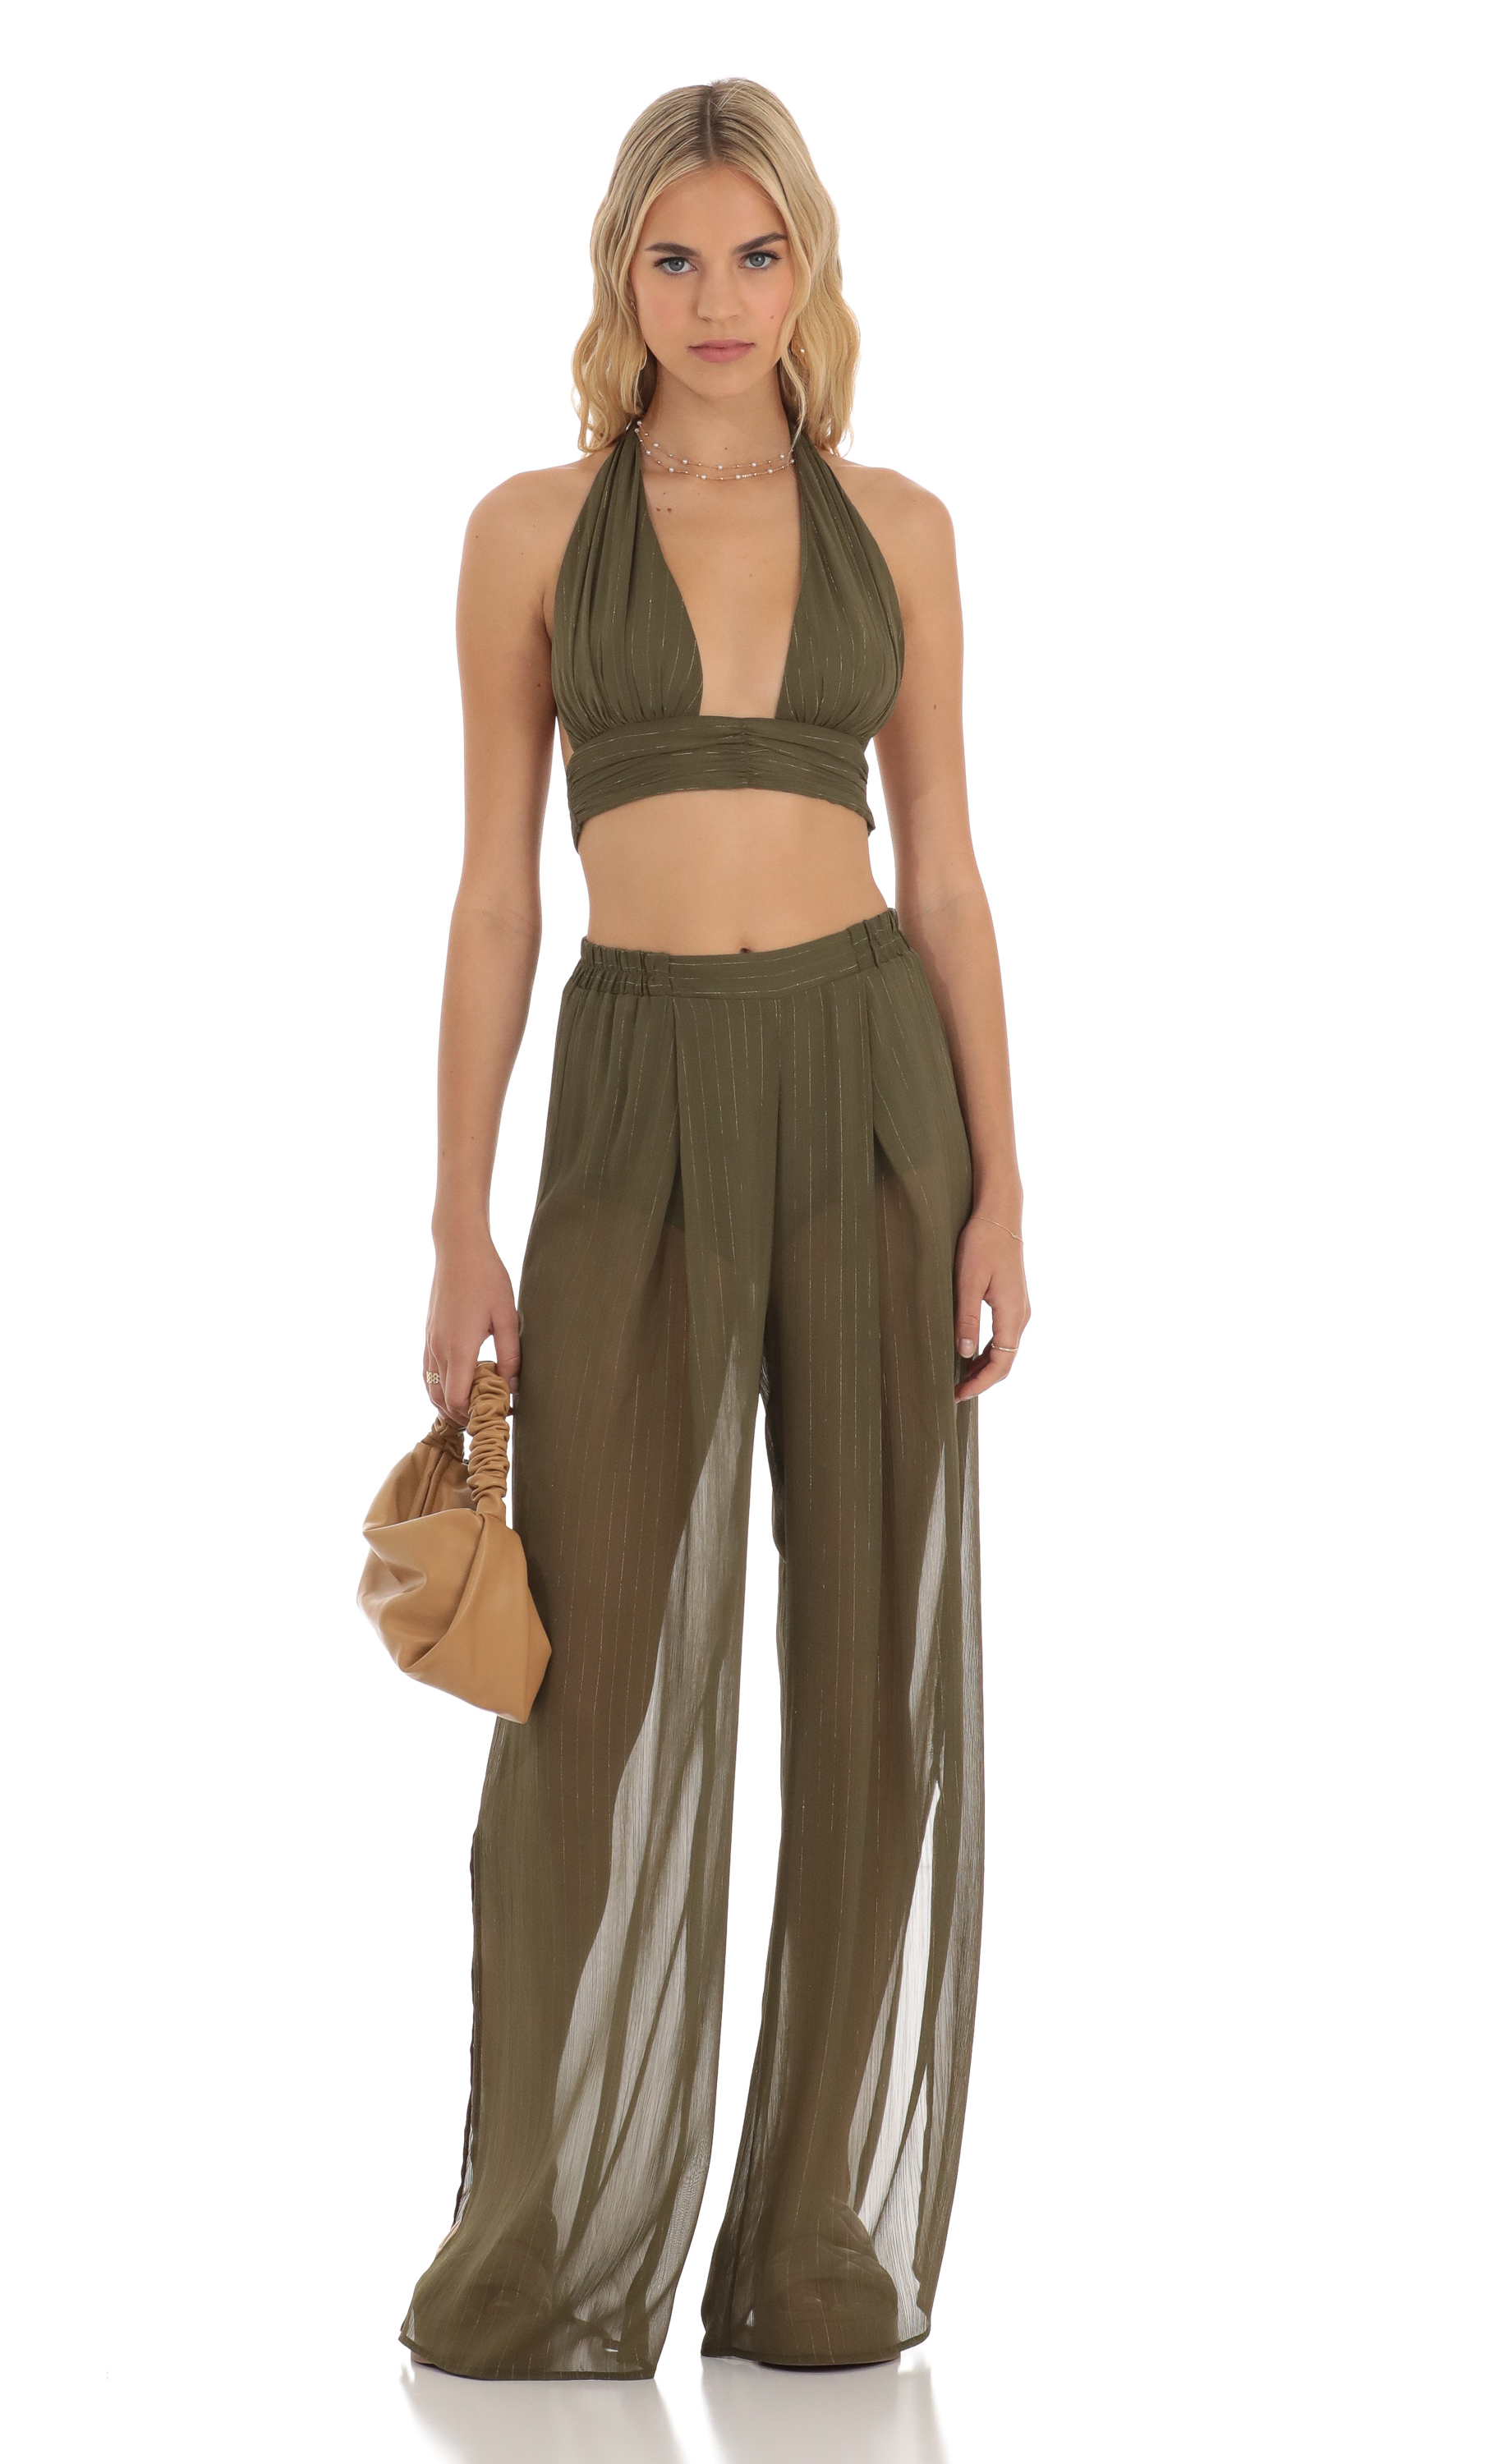 Lesly Gold Striped Three Piece Set in Olive Green